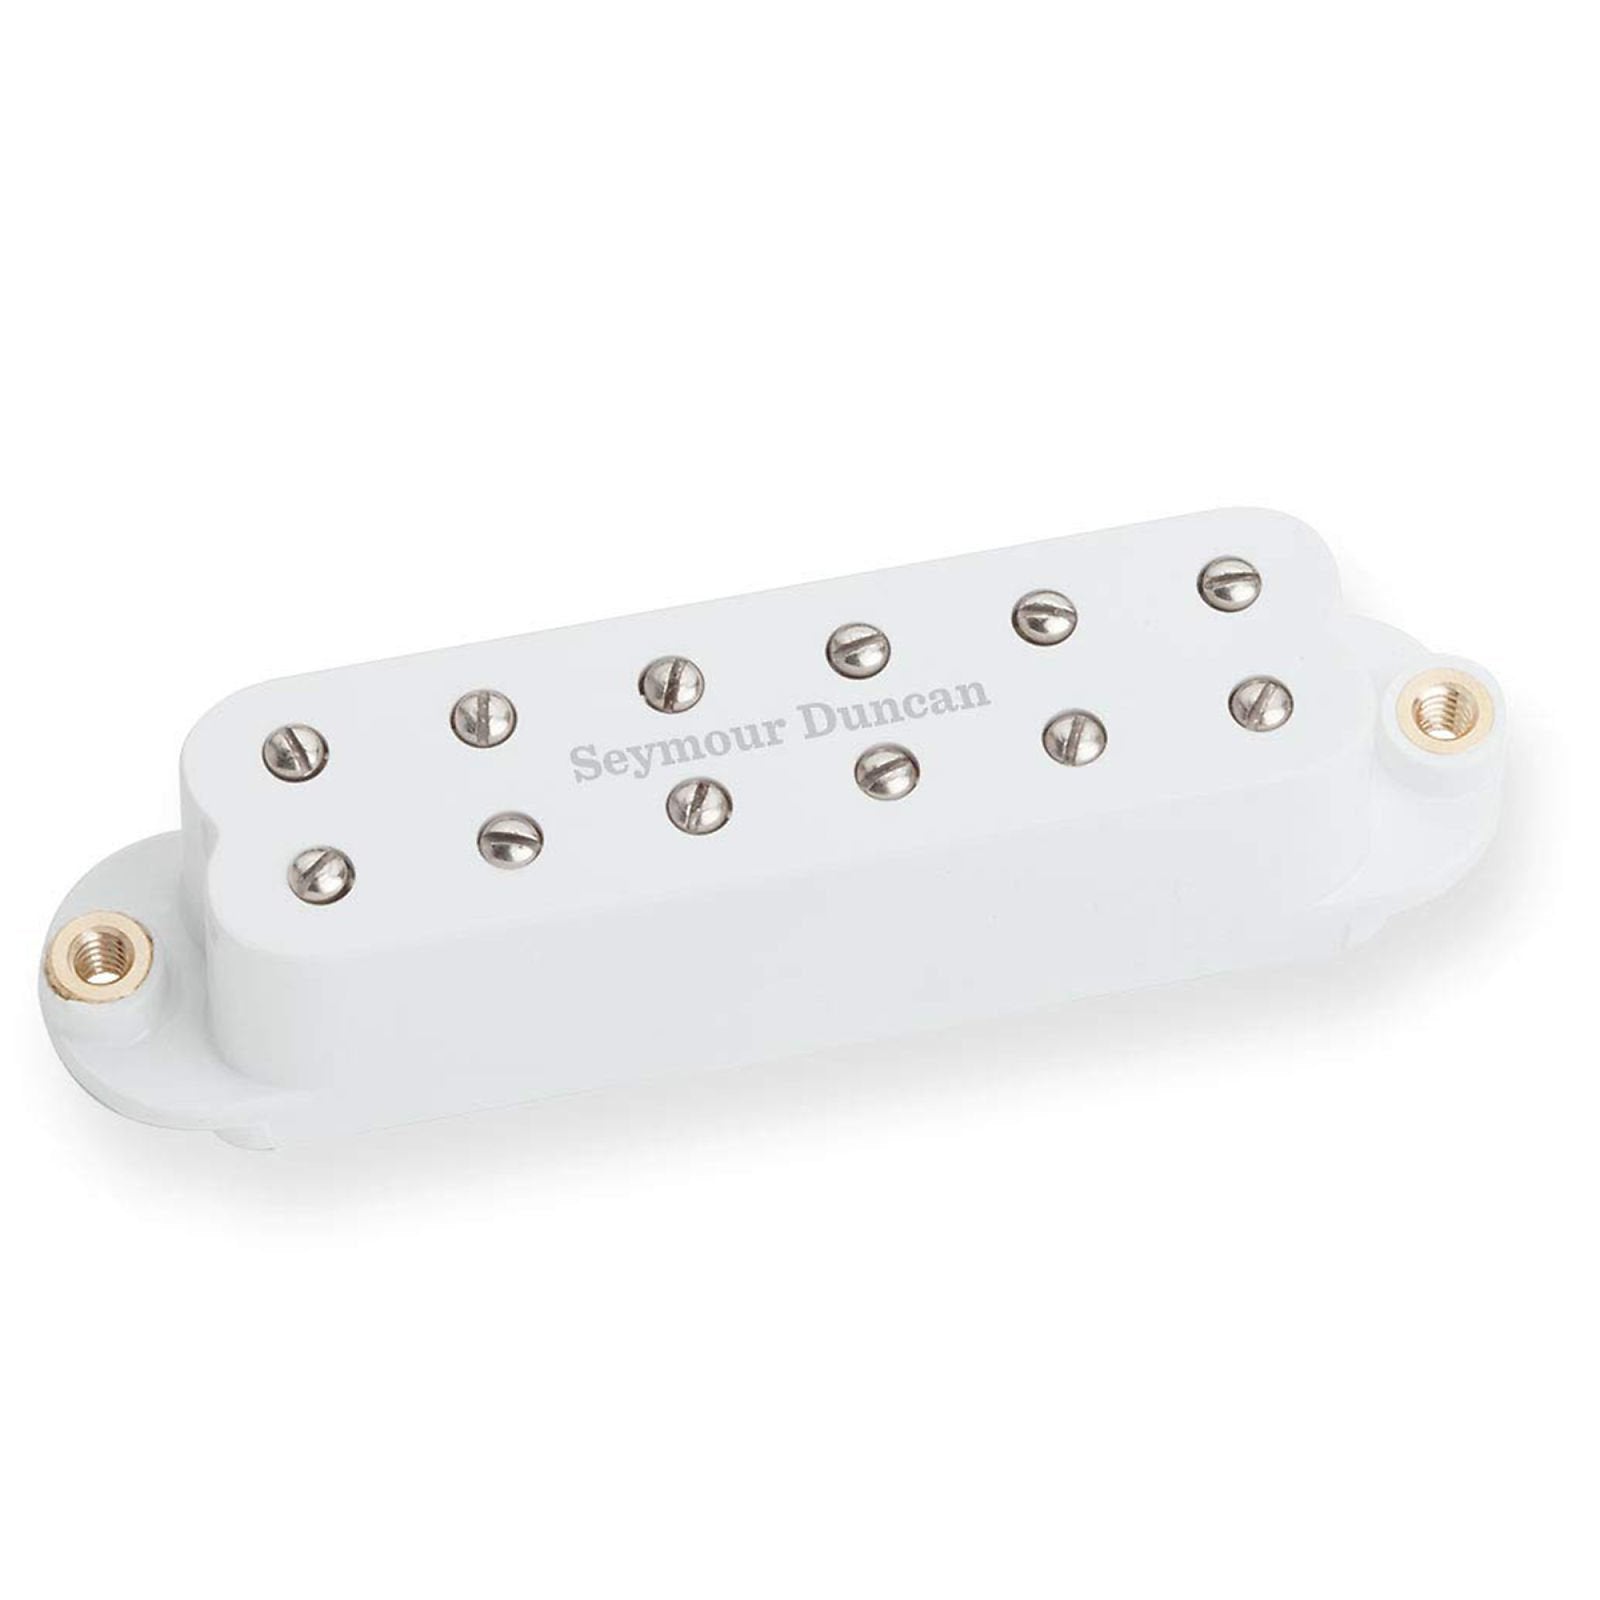 Seymour Duncan Billy Gibbons' Signature Series Red Devil PAF Humbucking Pickup for Bridge White 11205-42-W - The Guitar World